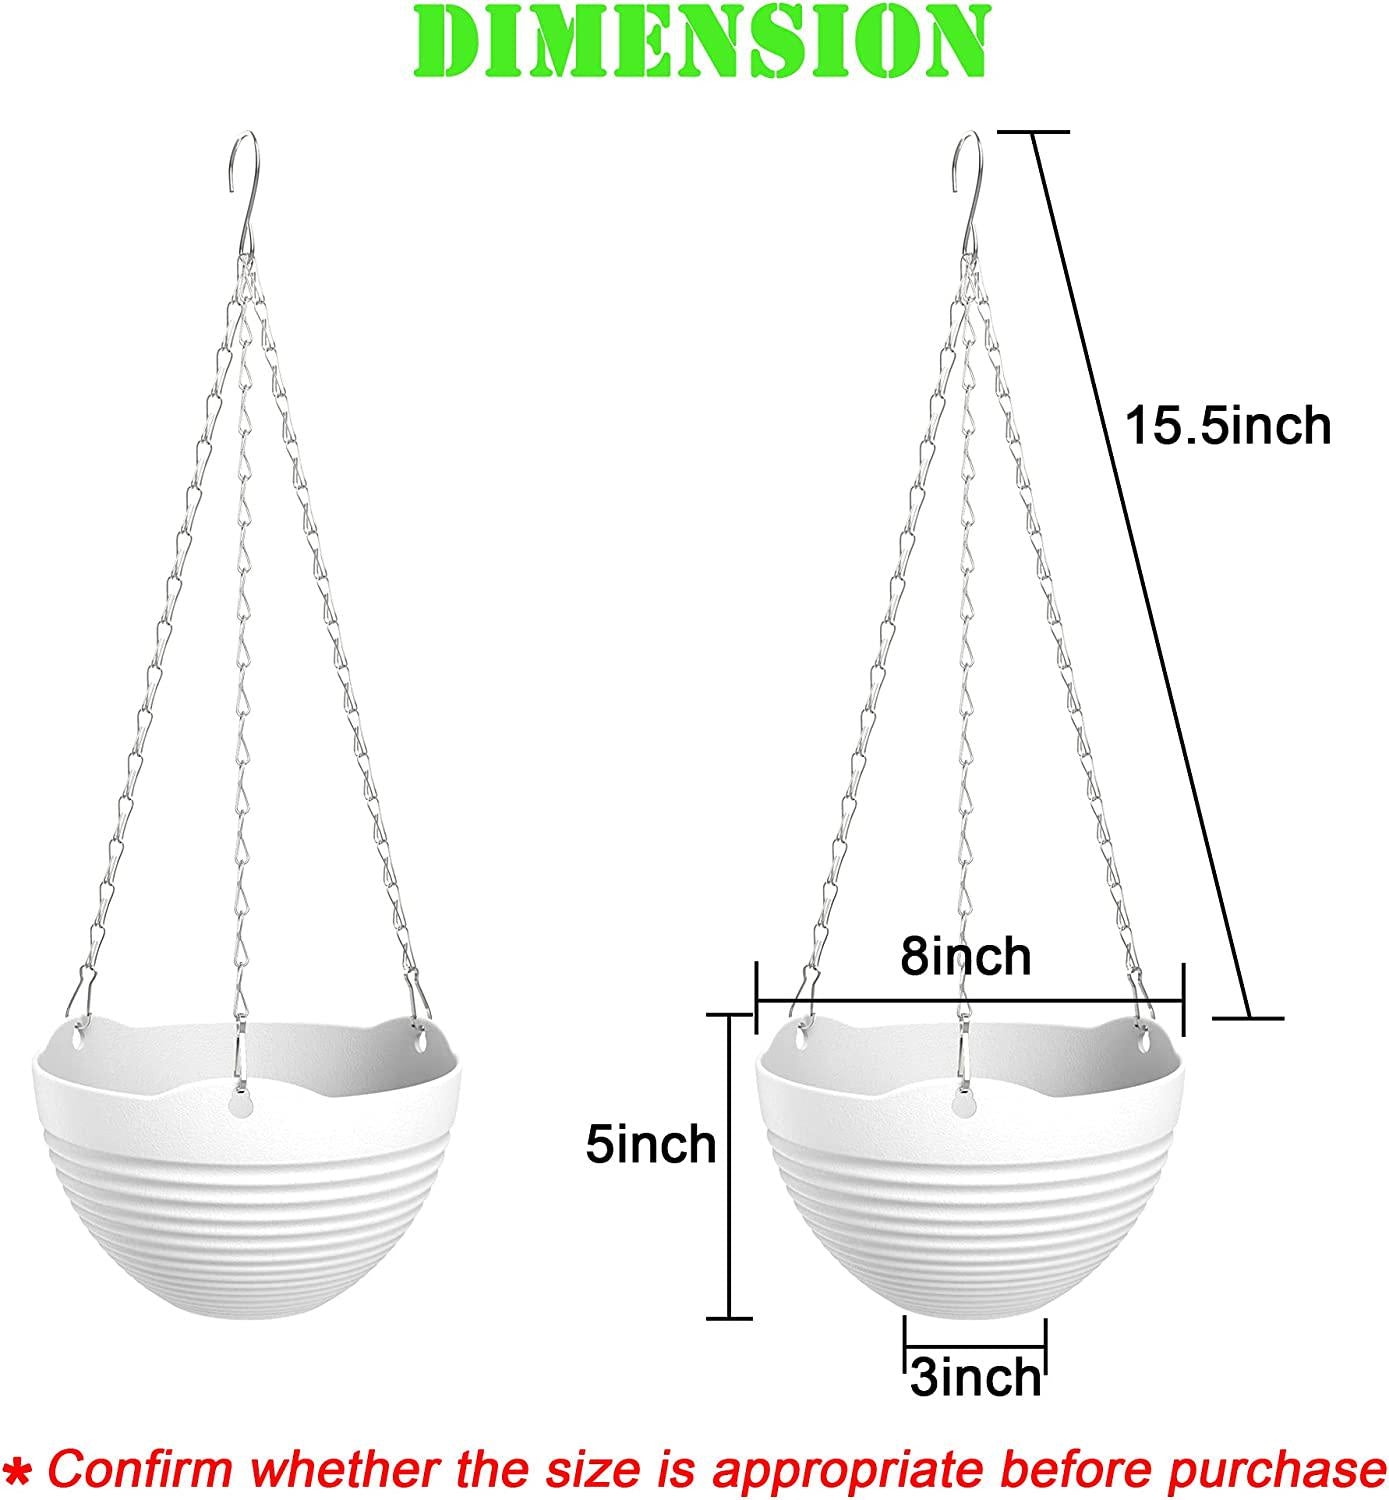 Hanging Planters, Set of 9 White Hanging Pots, 8 Hanging Flower Pots, Hanging Plant Pots Baskets with Drainage Plugs, Water Barrier and Hanging Chains Free Mini Garden Tools Set, Best Garden Gift-